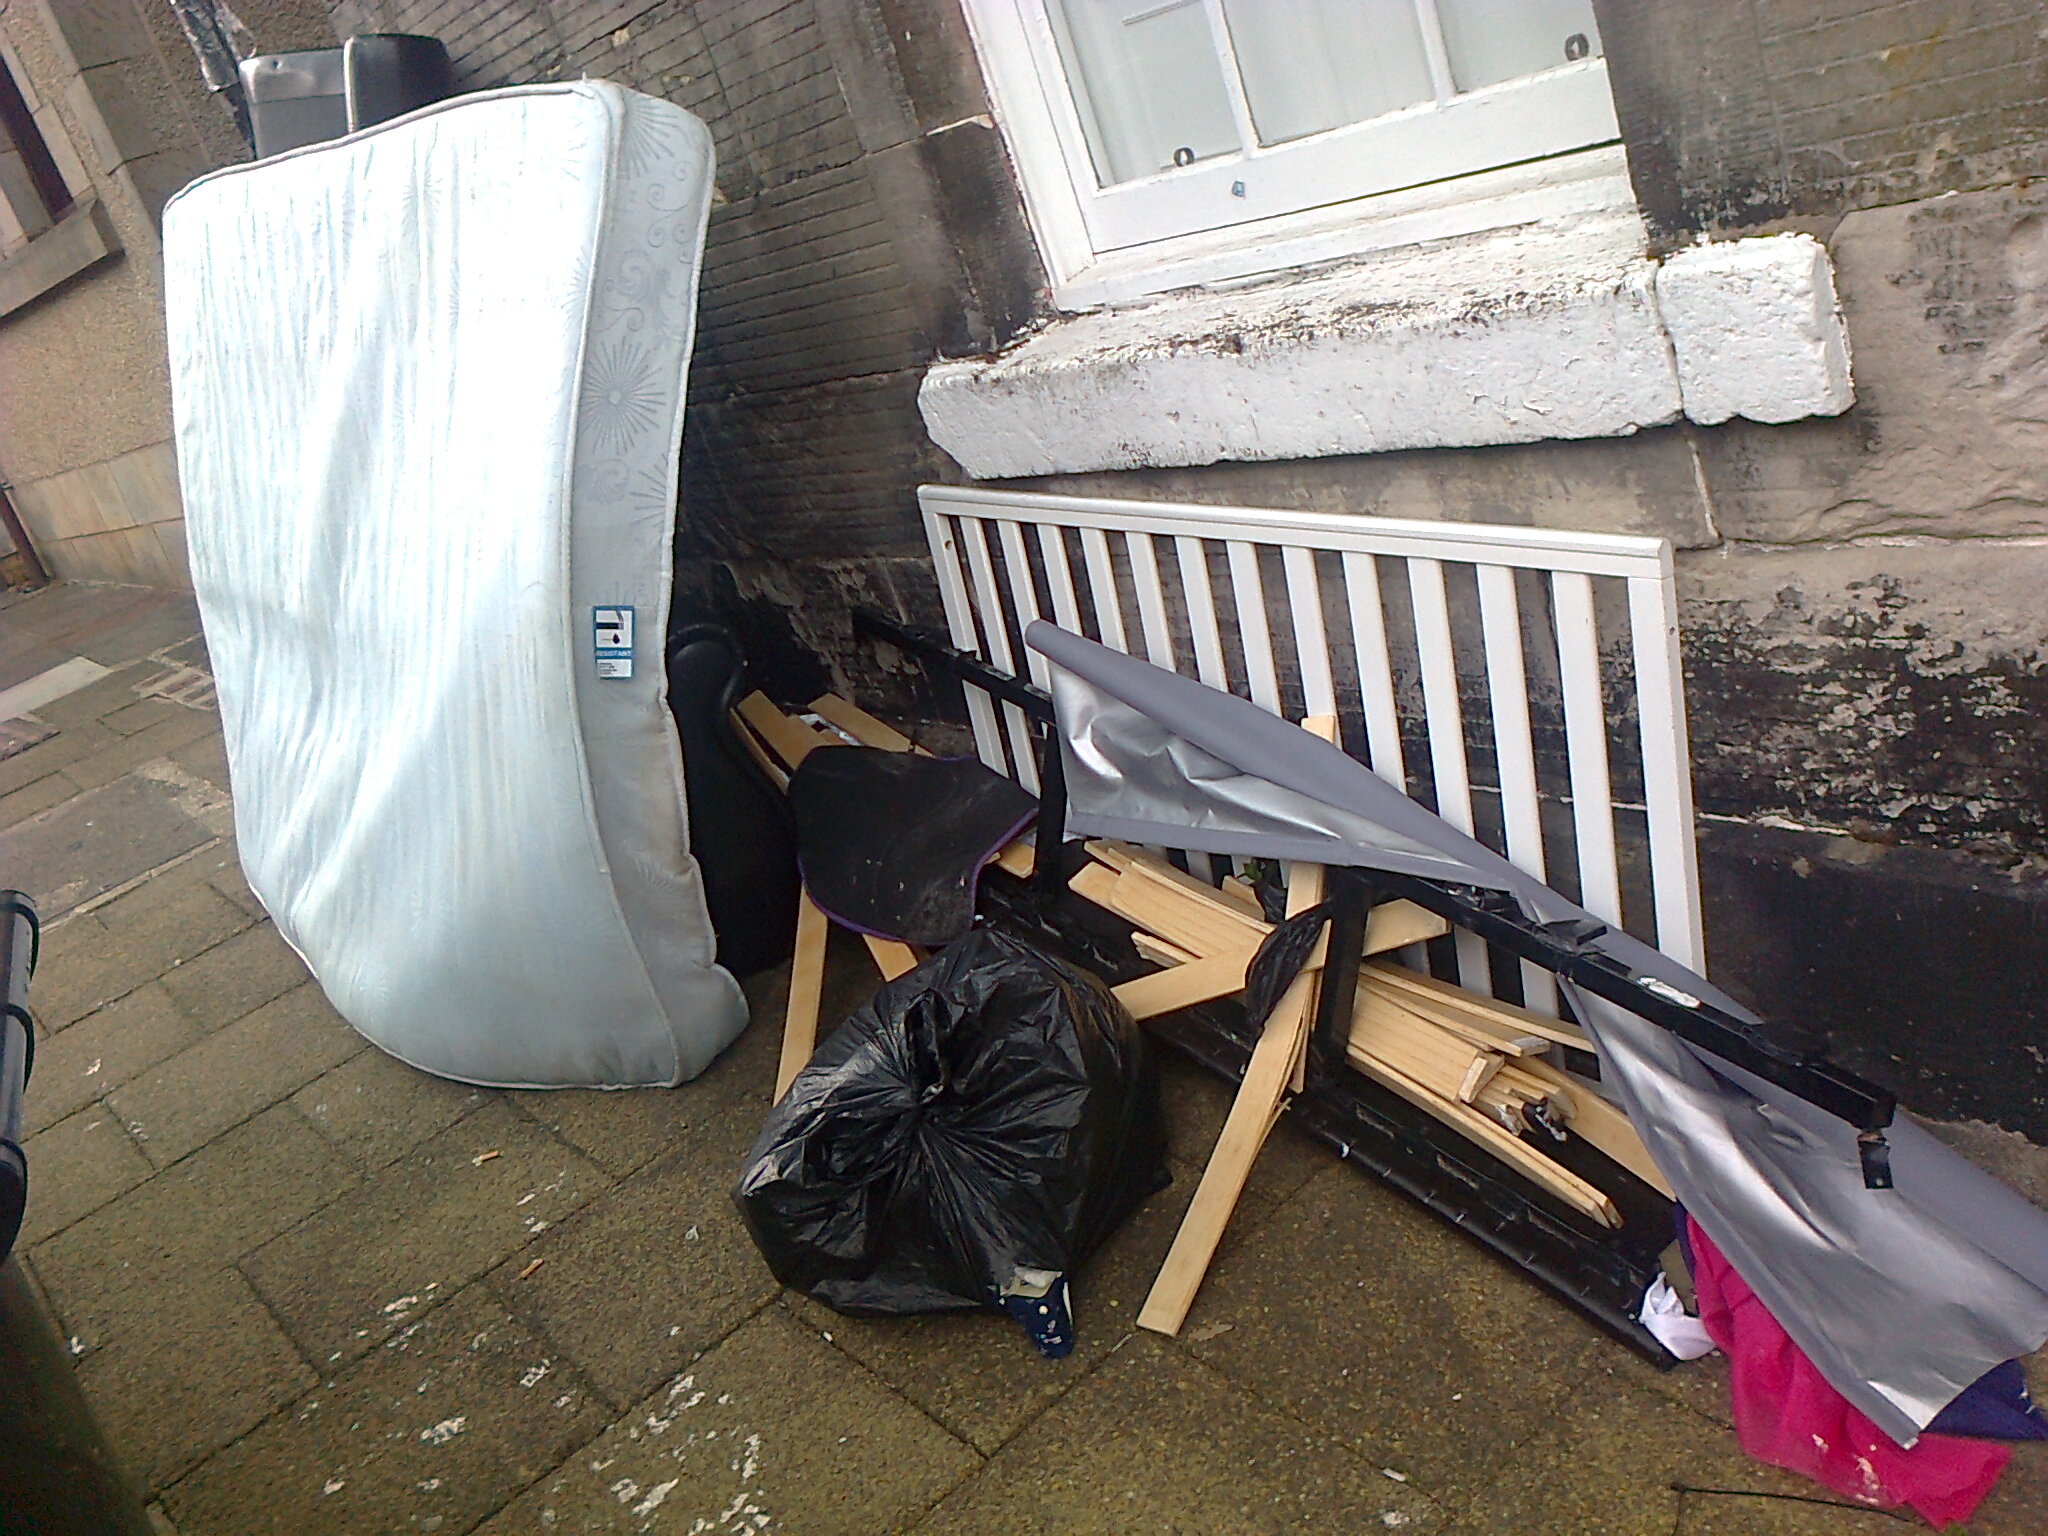 A mattress and dismantled bed frame lie on a pavement, propped against the wall of a building in Stirling in 2021.